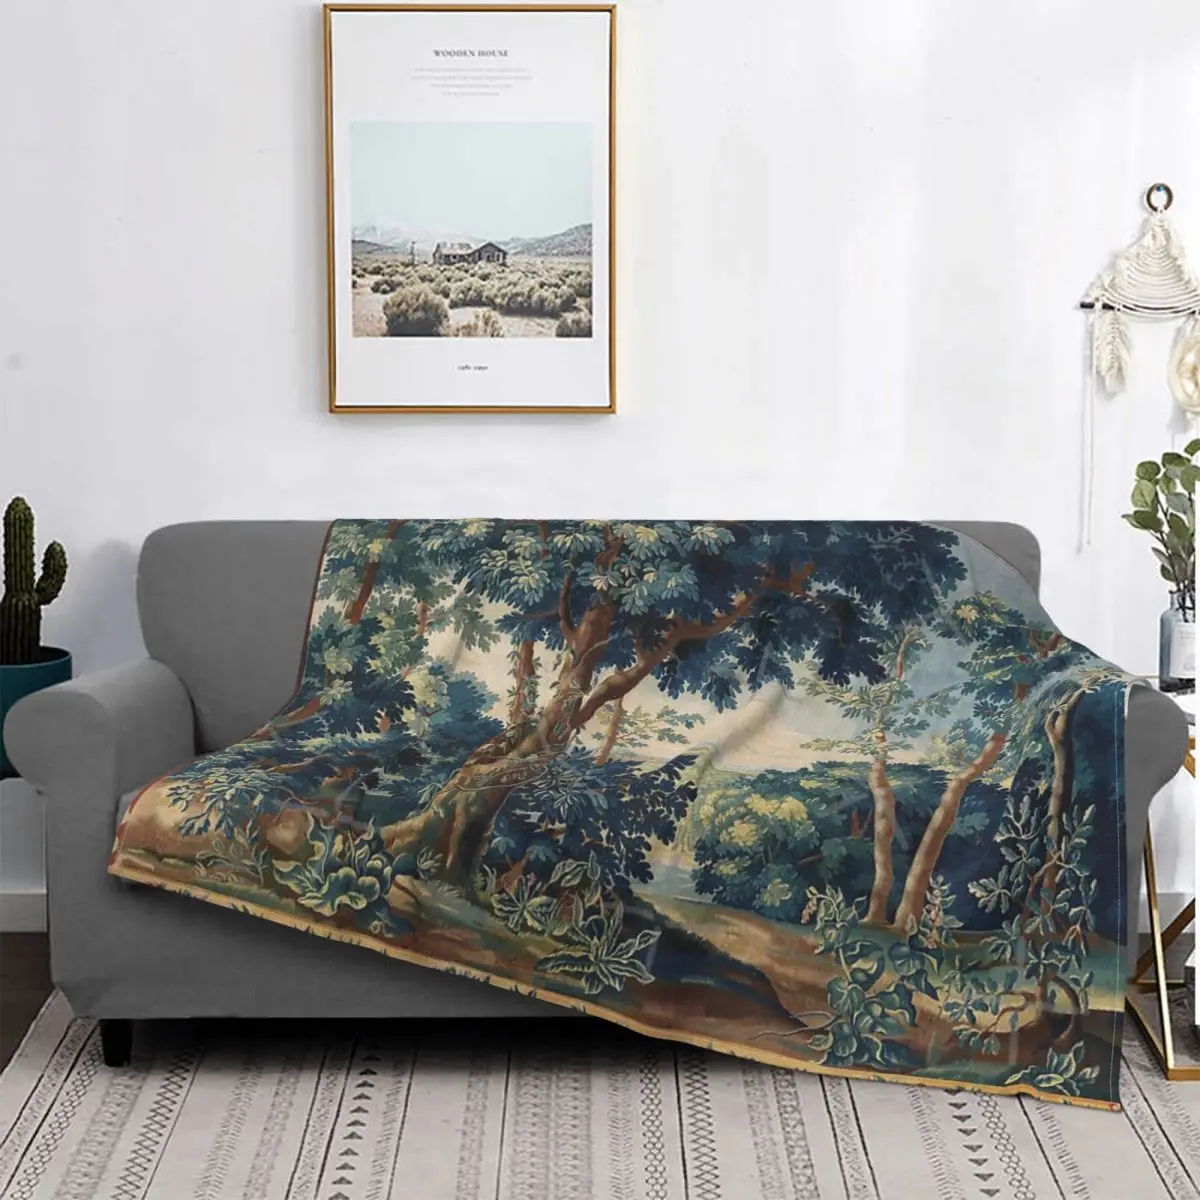 

Greenery Trees In Woodland Landscape Antique Flemish Tapestry Throw Blanket Drop Fabrics Bed Covers fit Couch Sofa Suitable